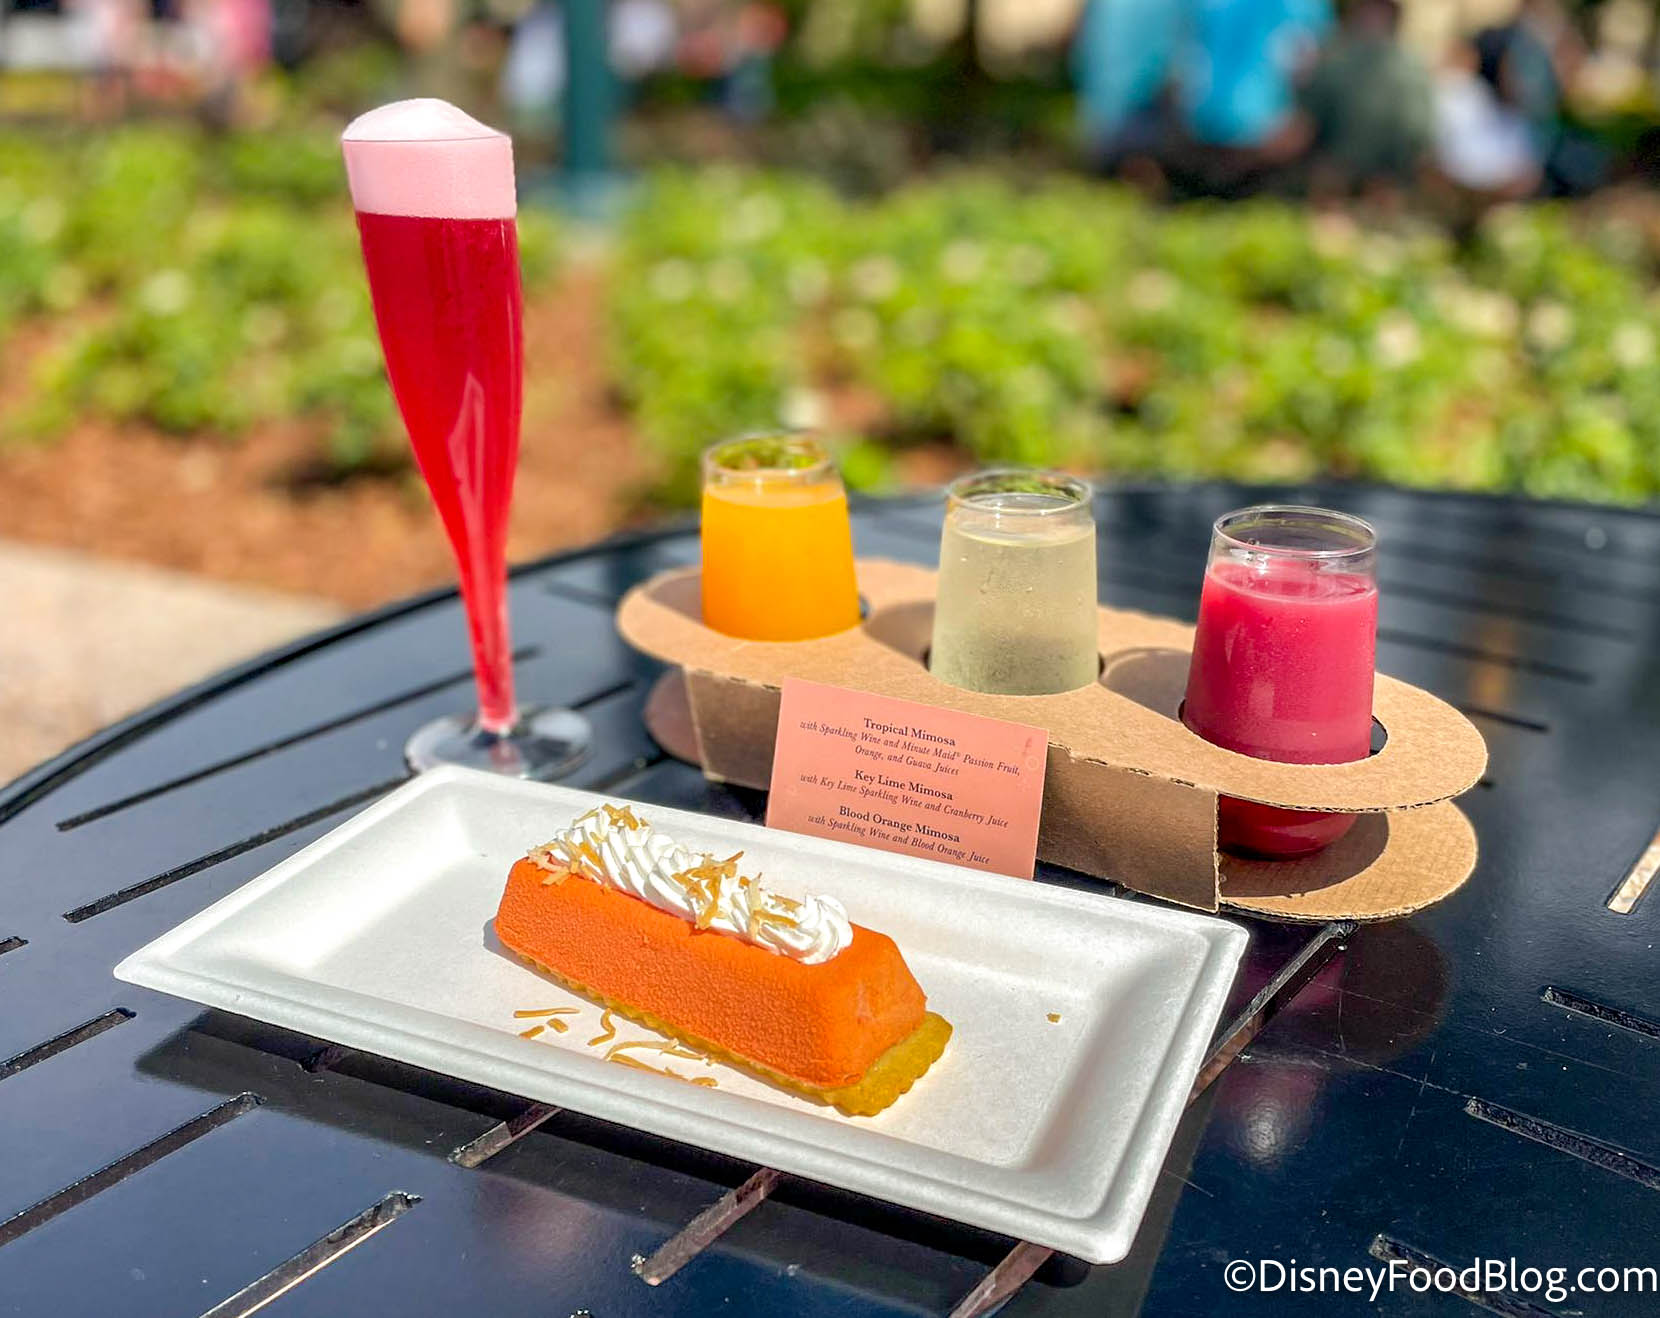 https://www.disneyfoodblog.com/wp-content/uploads/2022/07/2022-wdw-epcot-food-and-wine-festival-shimmering-sips-spread-flight-guava-mousse-berry-sour-ale-mimosa-3.jpg